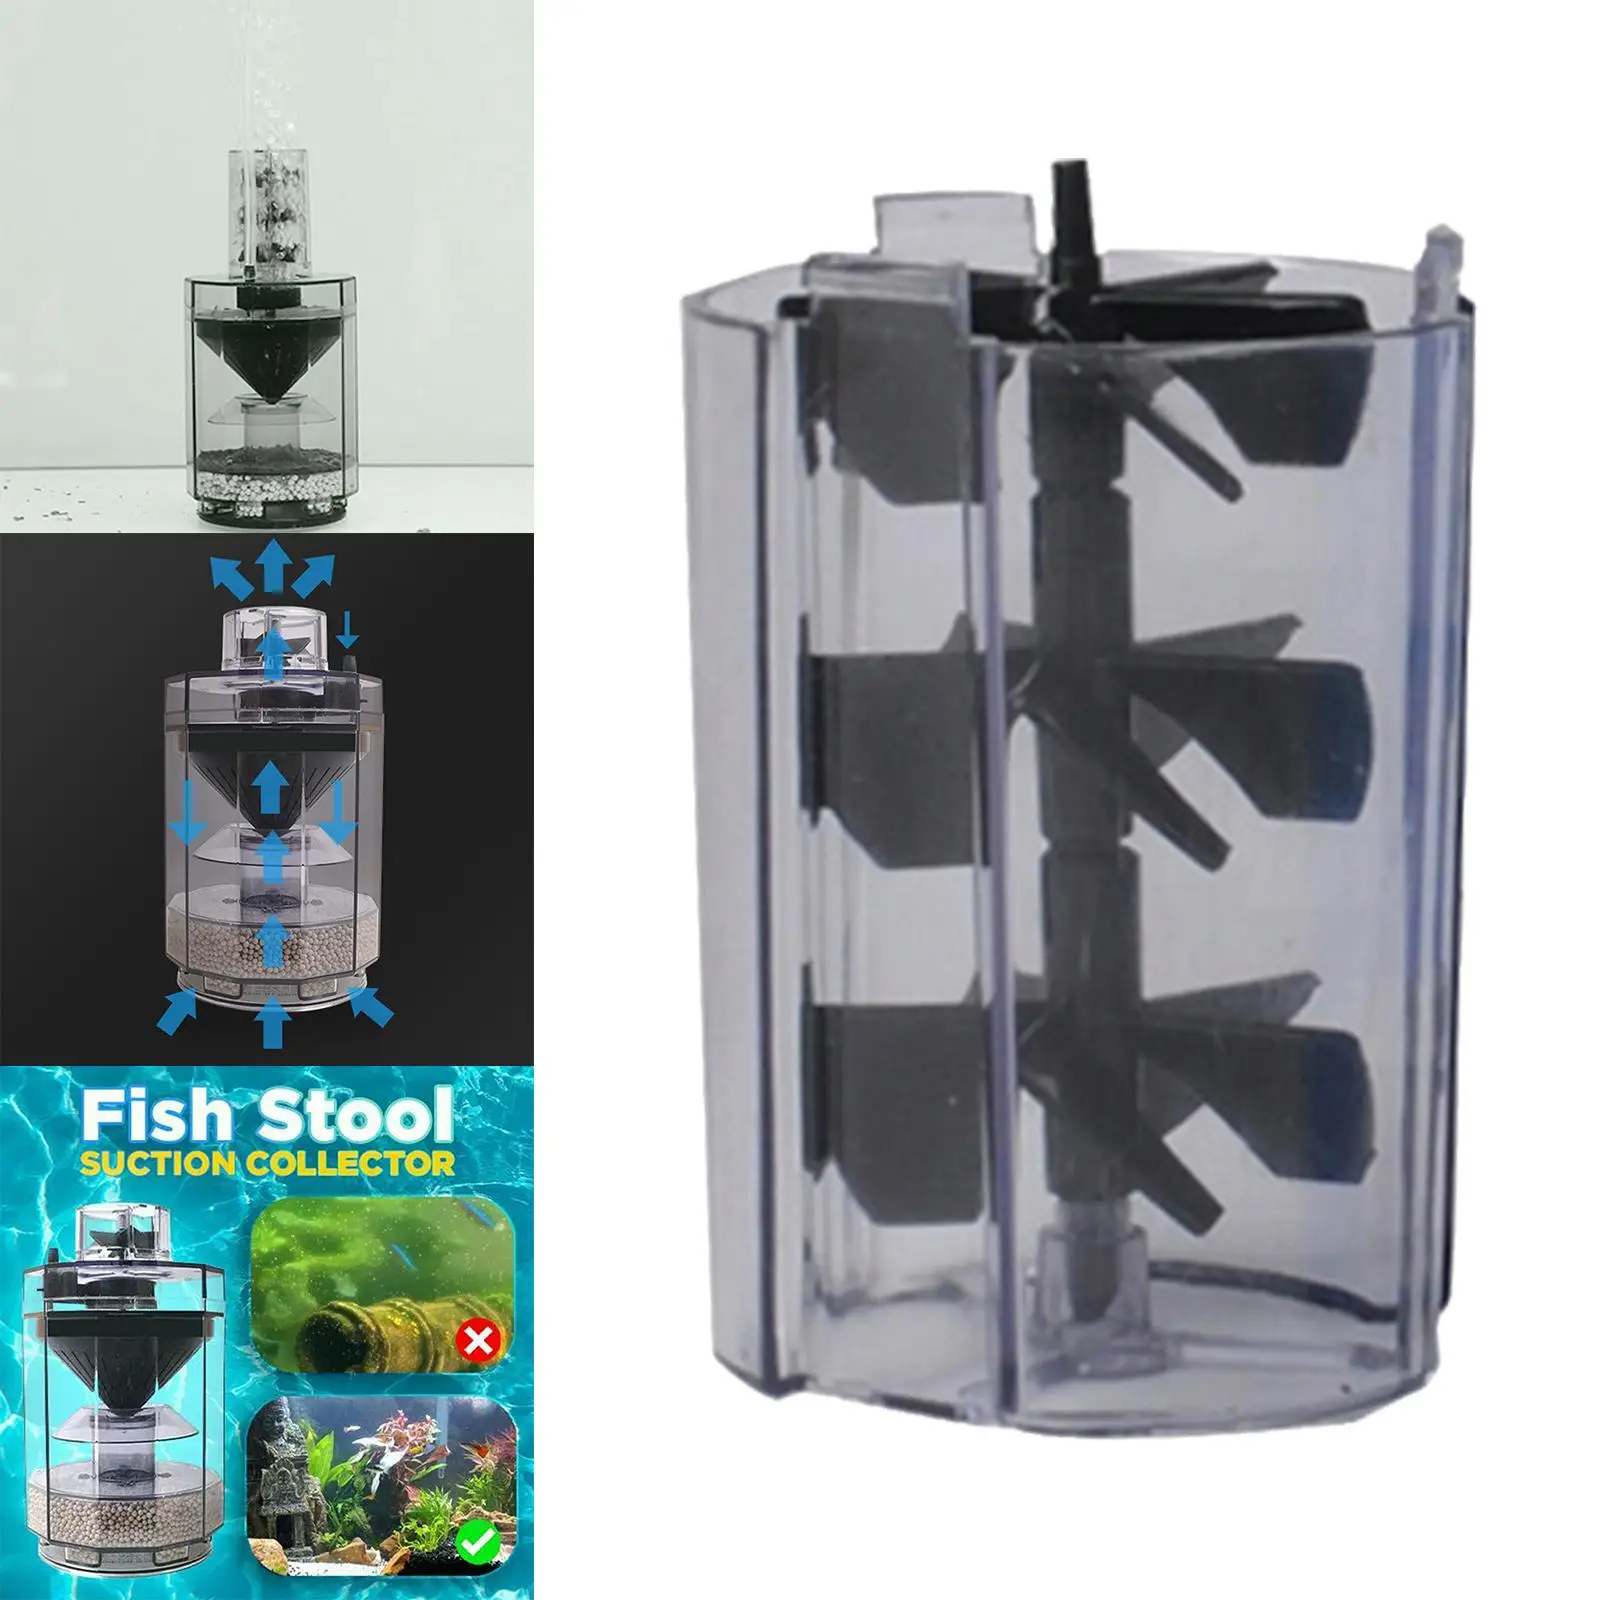 Spiral Fan for Aquarium Fish Stool Suction Collector Tank of Fish